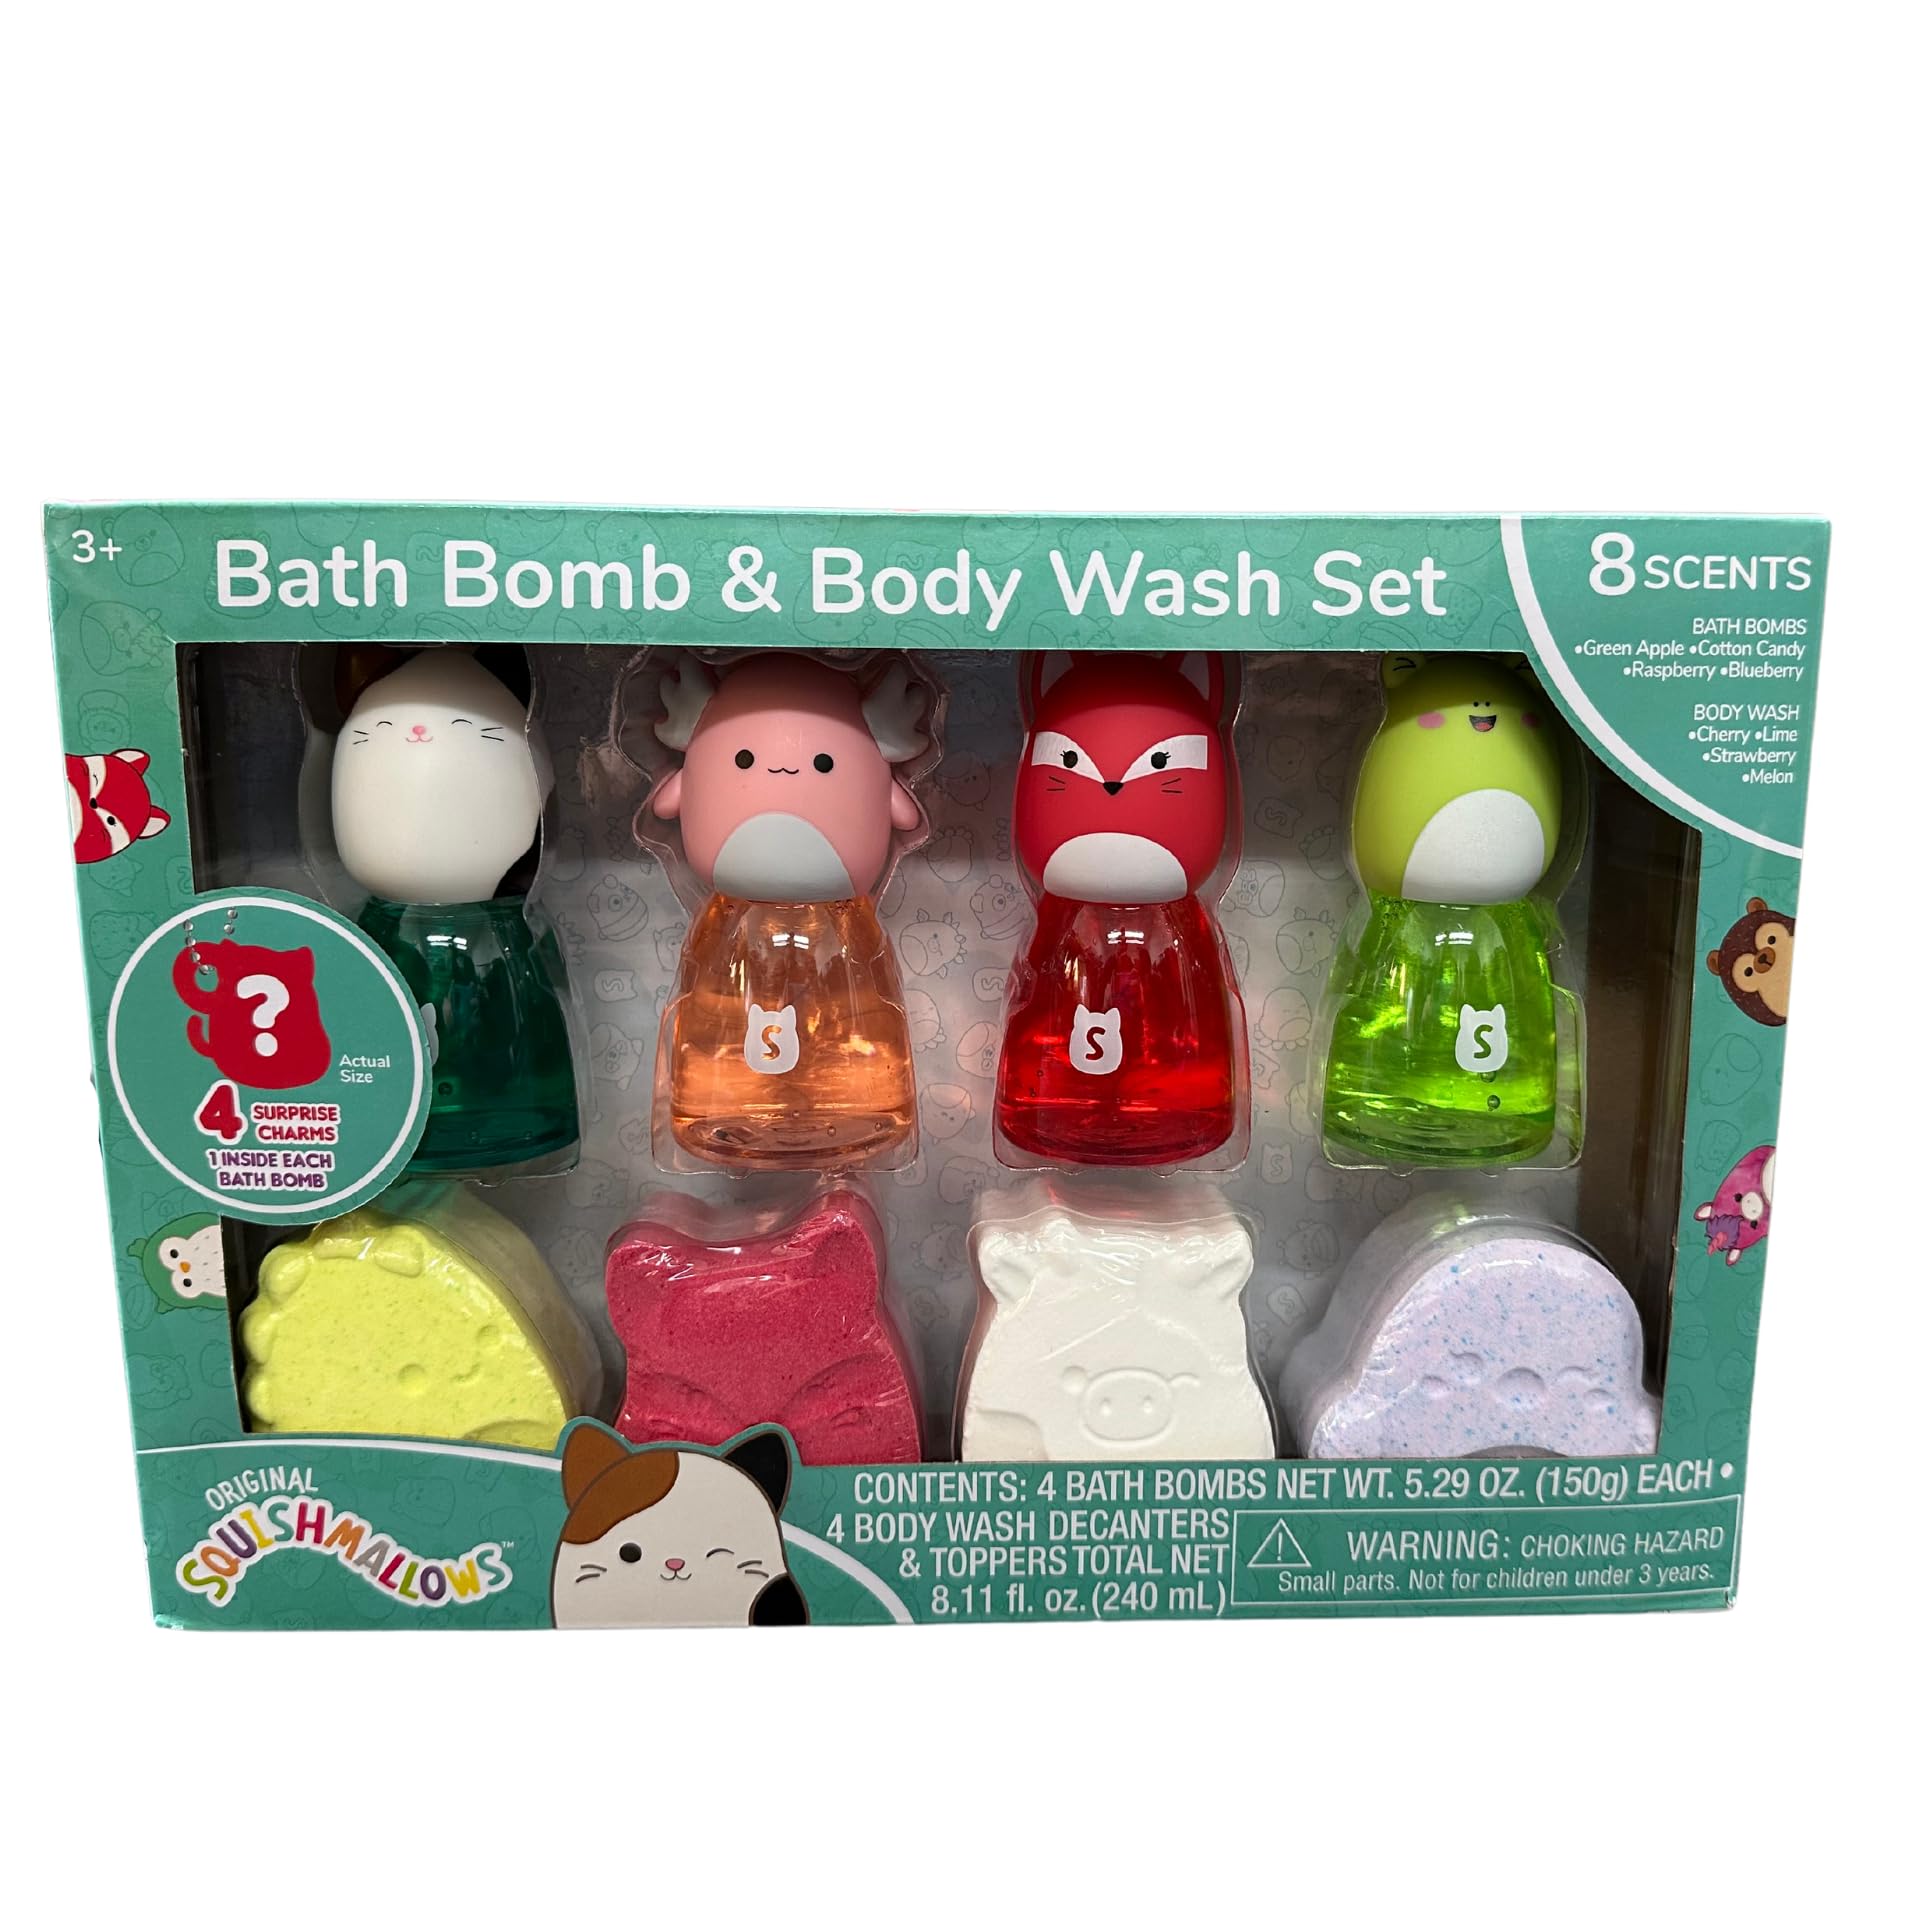 Original Squishmallows Bath Bomb & Body Wash Set, 8-Piece Set with 4 Scented Body Wash & 4 Bath Bombs, 4 Surprise Charms in Each Bath Bomb! Make Bath Time Fun! Ages 3+